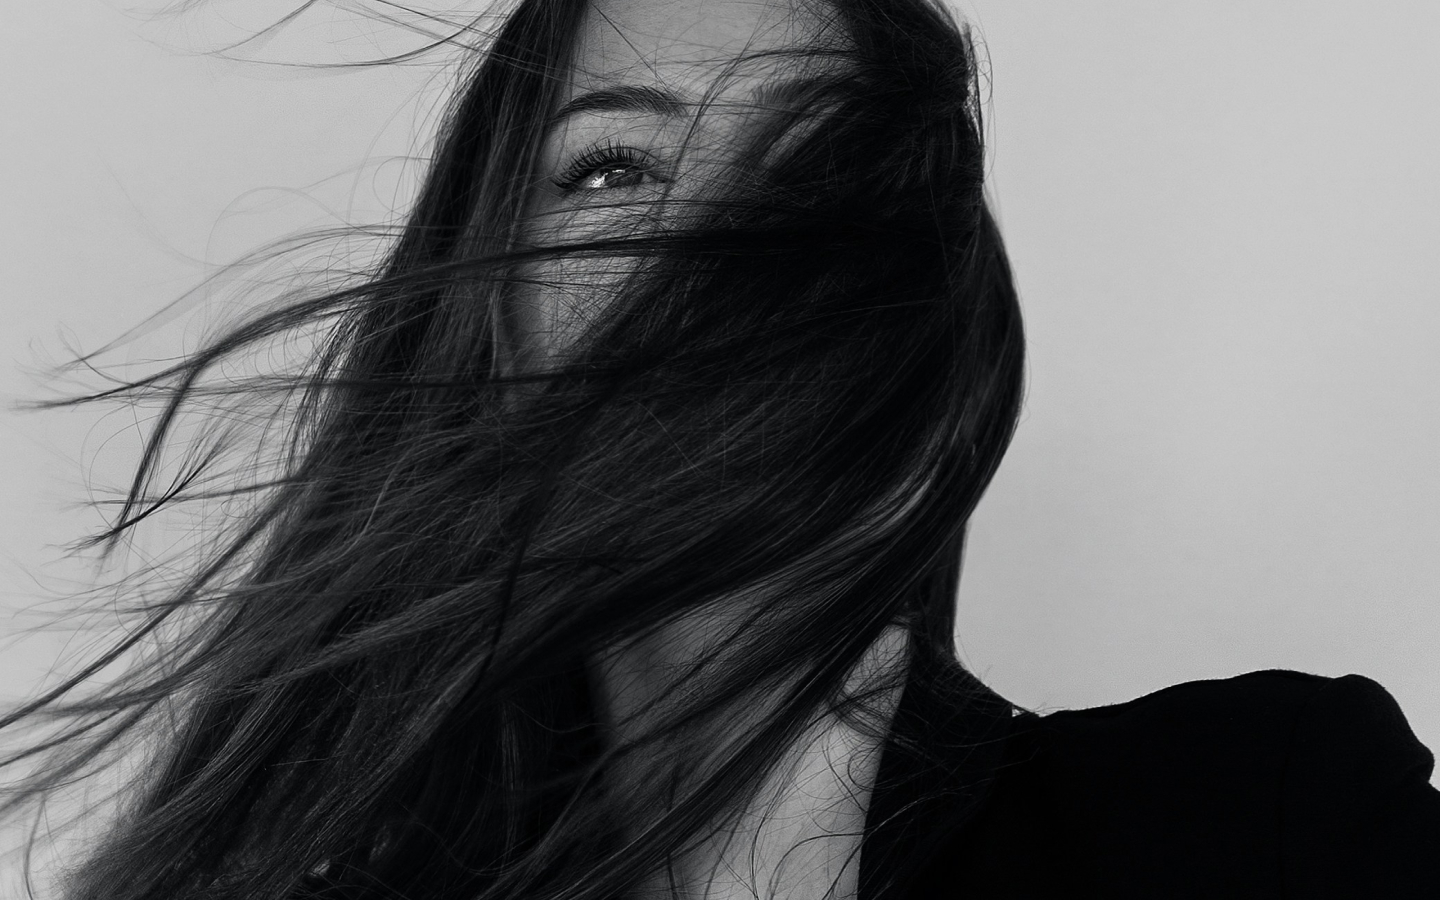 A black-and-white close-up portrait of a woman with her face partially obscured by her flowing dark hair creates a mysterious and artistic effect.